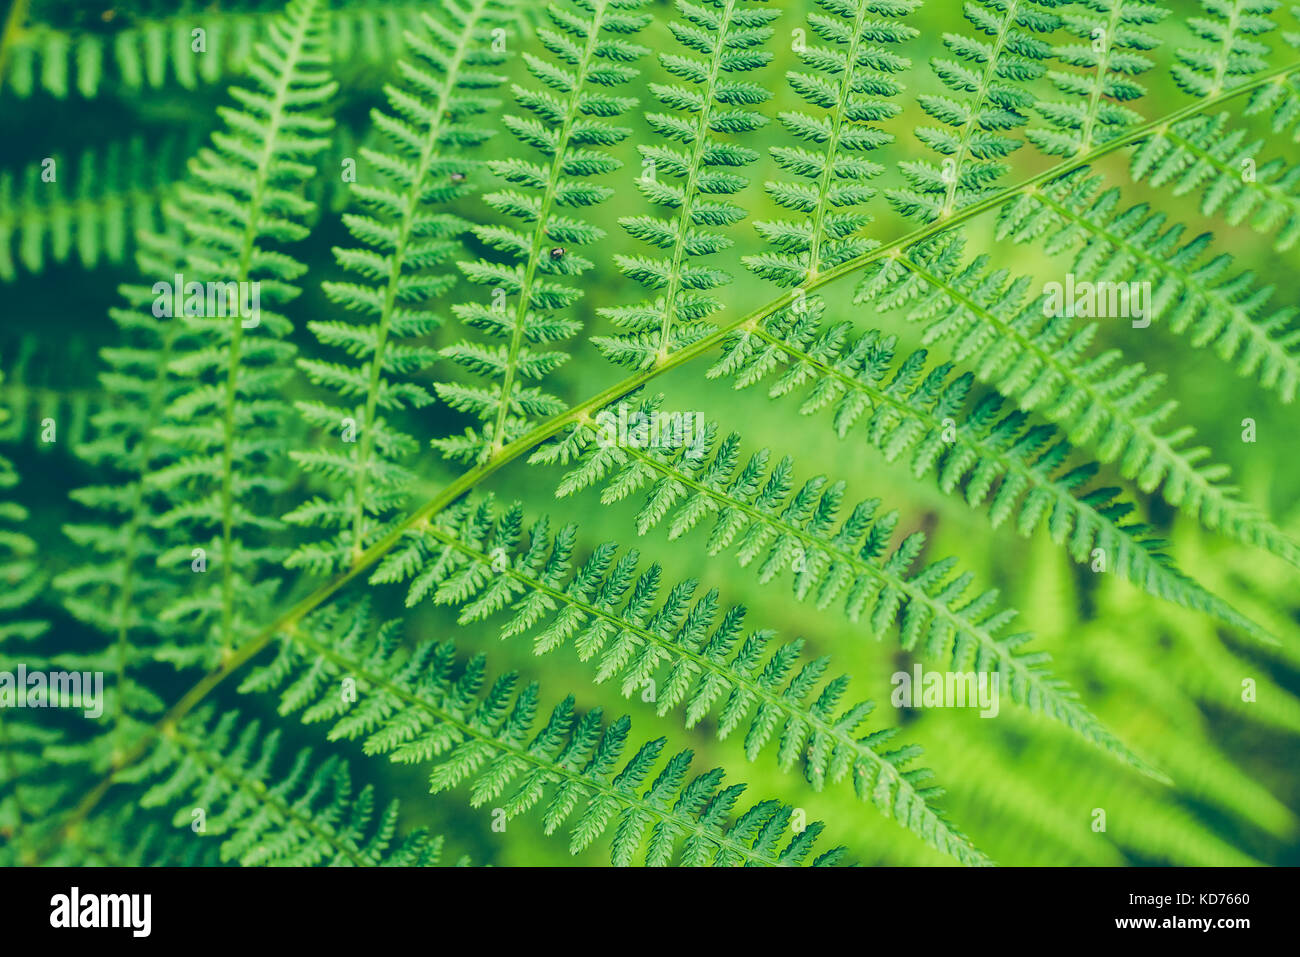 Beautyful fern leaf. Green foliage close up. Natural floral fern background Stock Photo